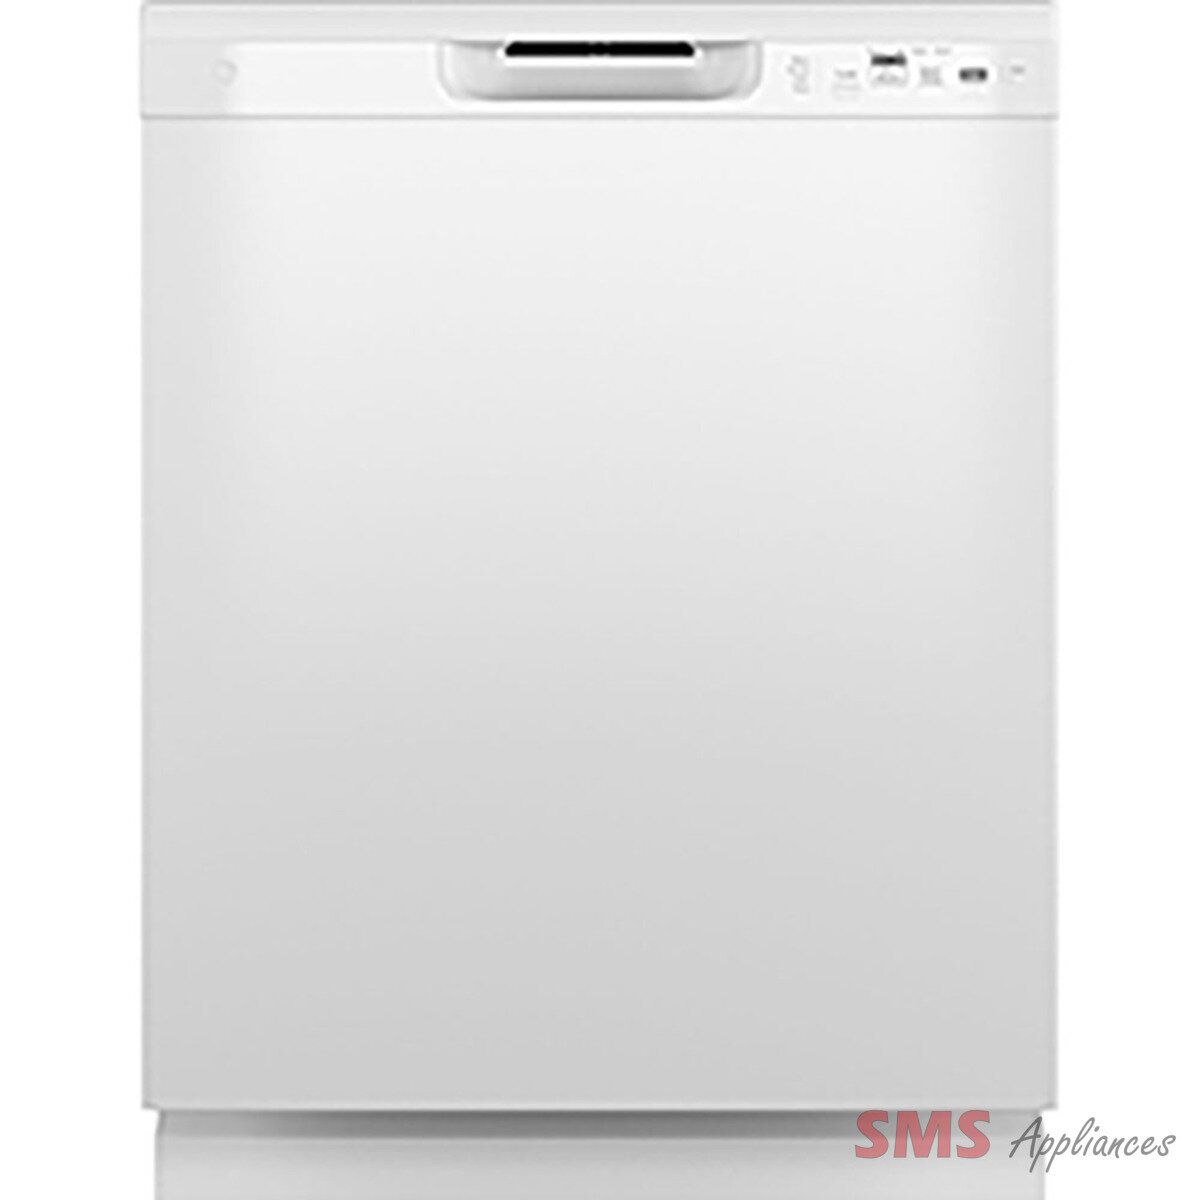 BRAND NEW - GE 24" 59 dB Built-In Dishwasher ​GE GDF510PGRWW(Warehouse Calgary)